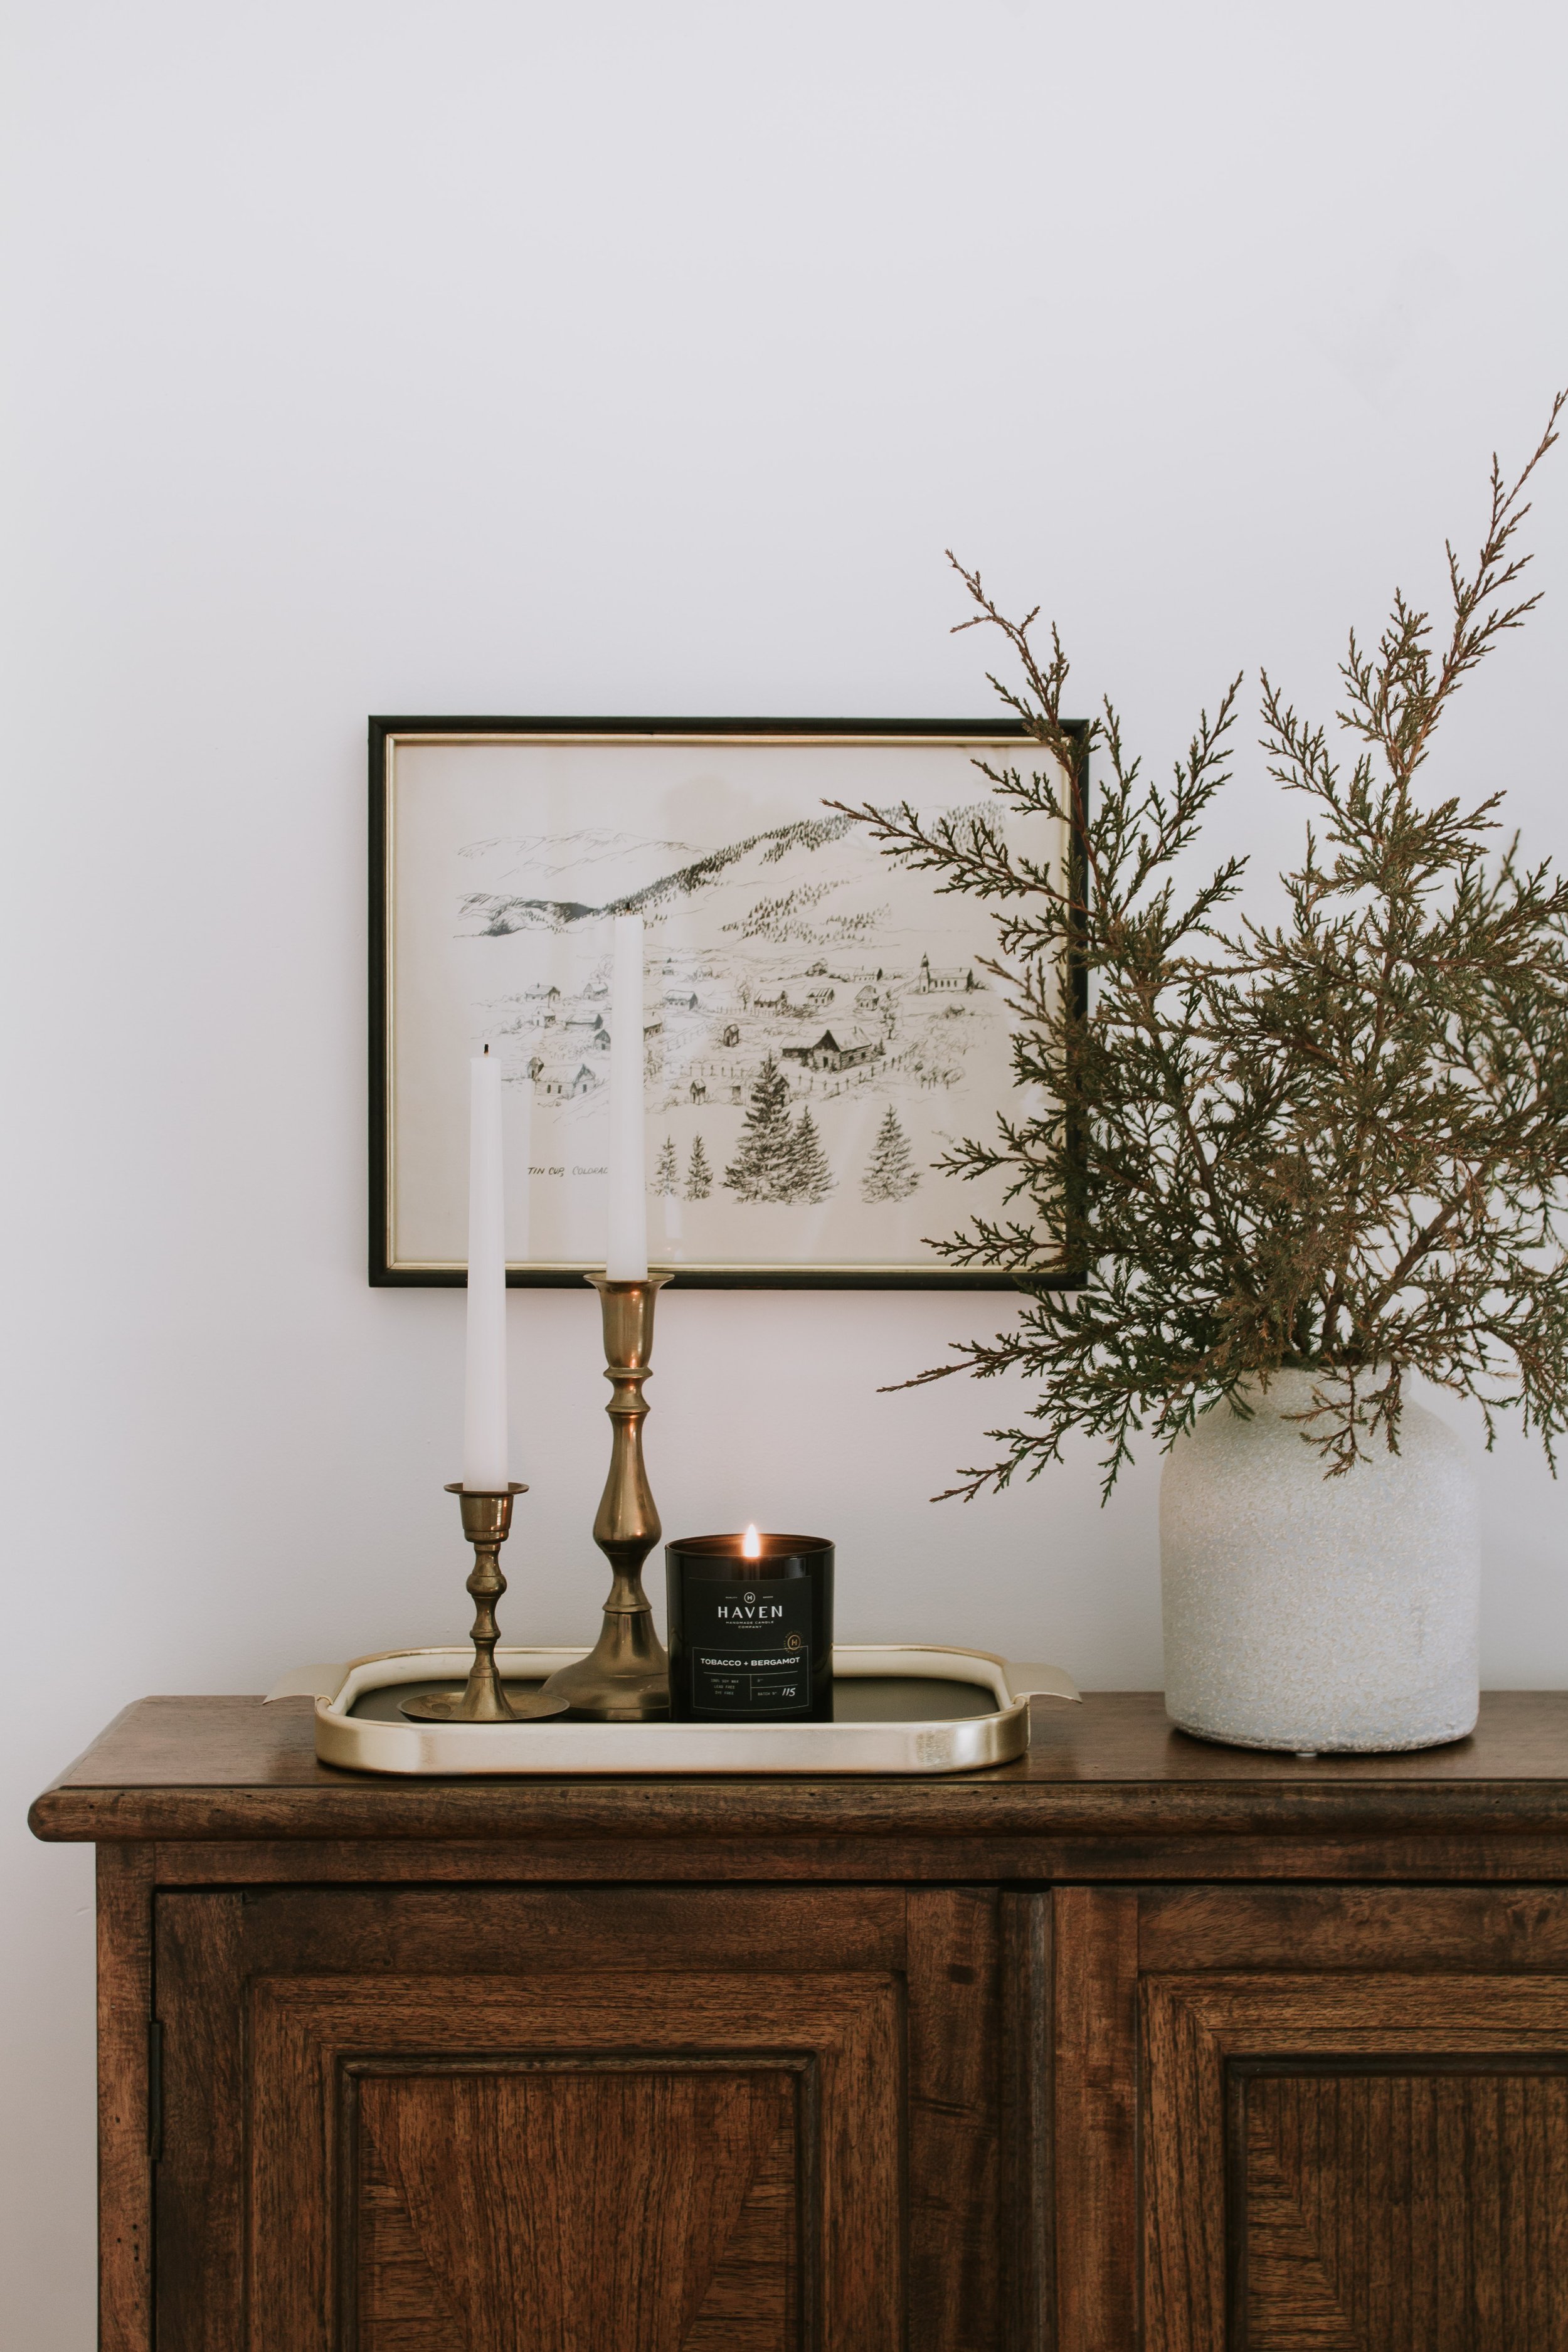 Top 12 Most Popular Posts - Subtle Christmas decor with a vintage mountain town sketch art, brass candlesticks, and juniper stems. | Nadine Stay